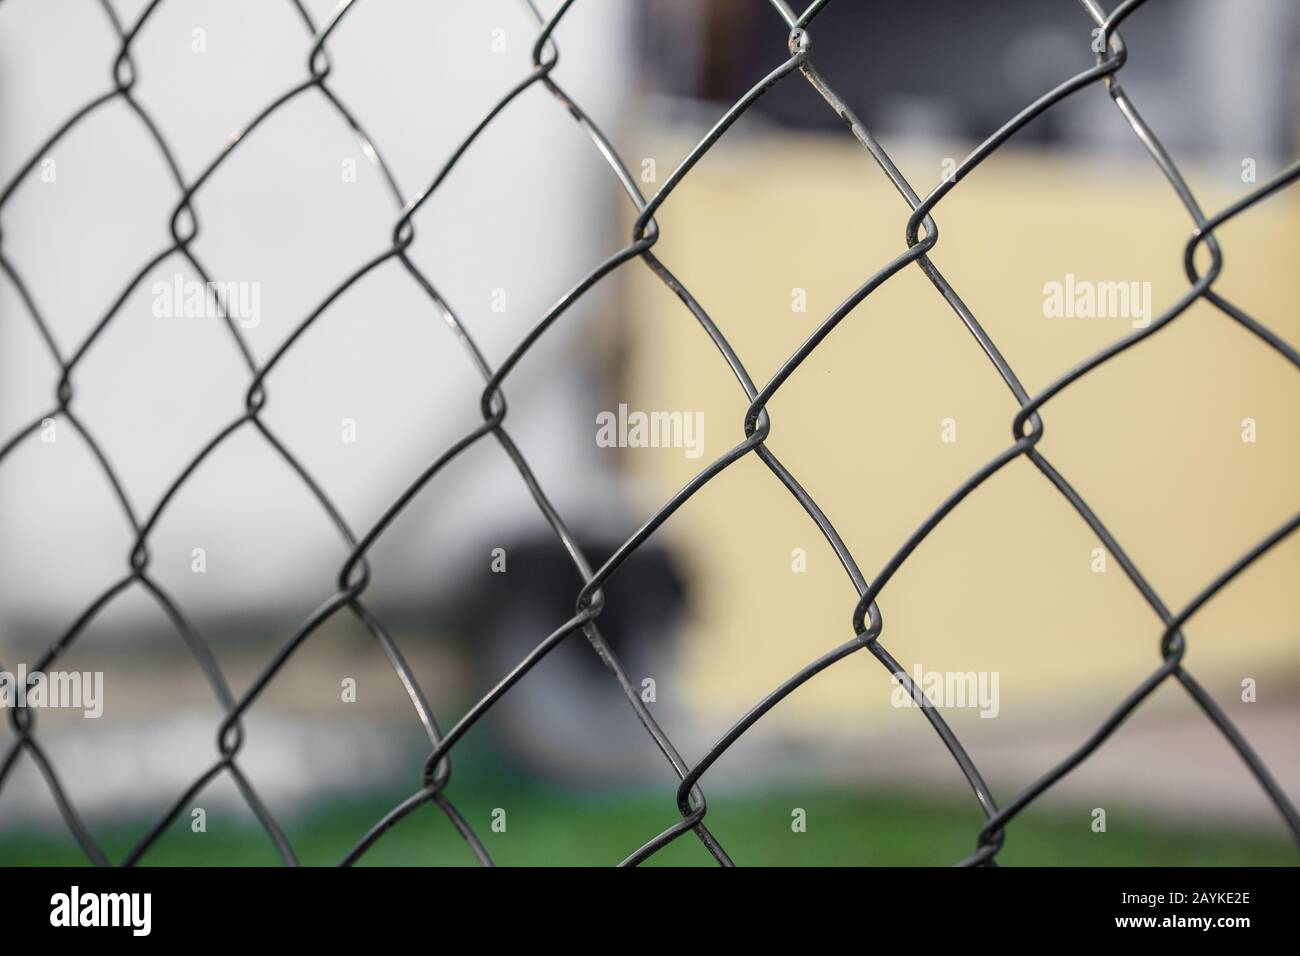 Wire fence (cyclone fencing) in repeating patterns (fence, chain, link) Stock Photo